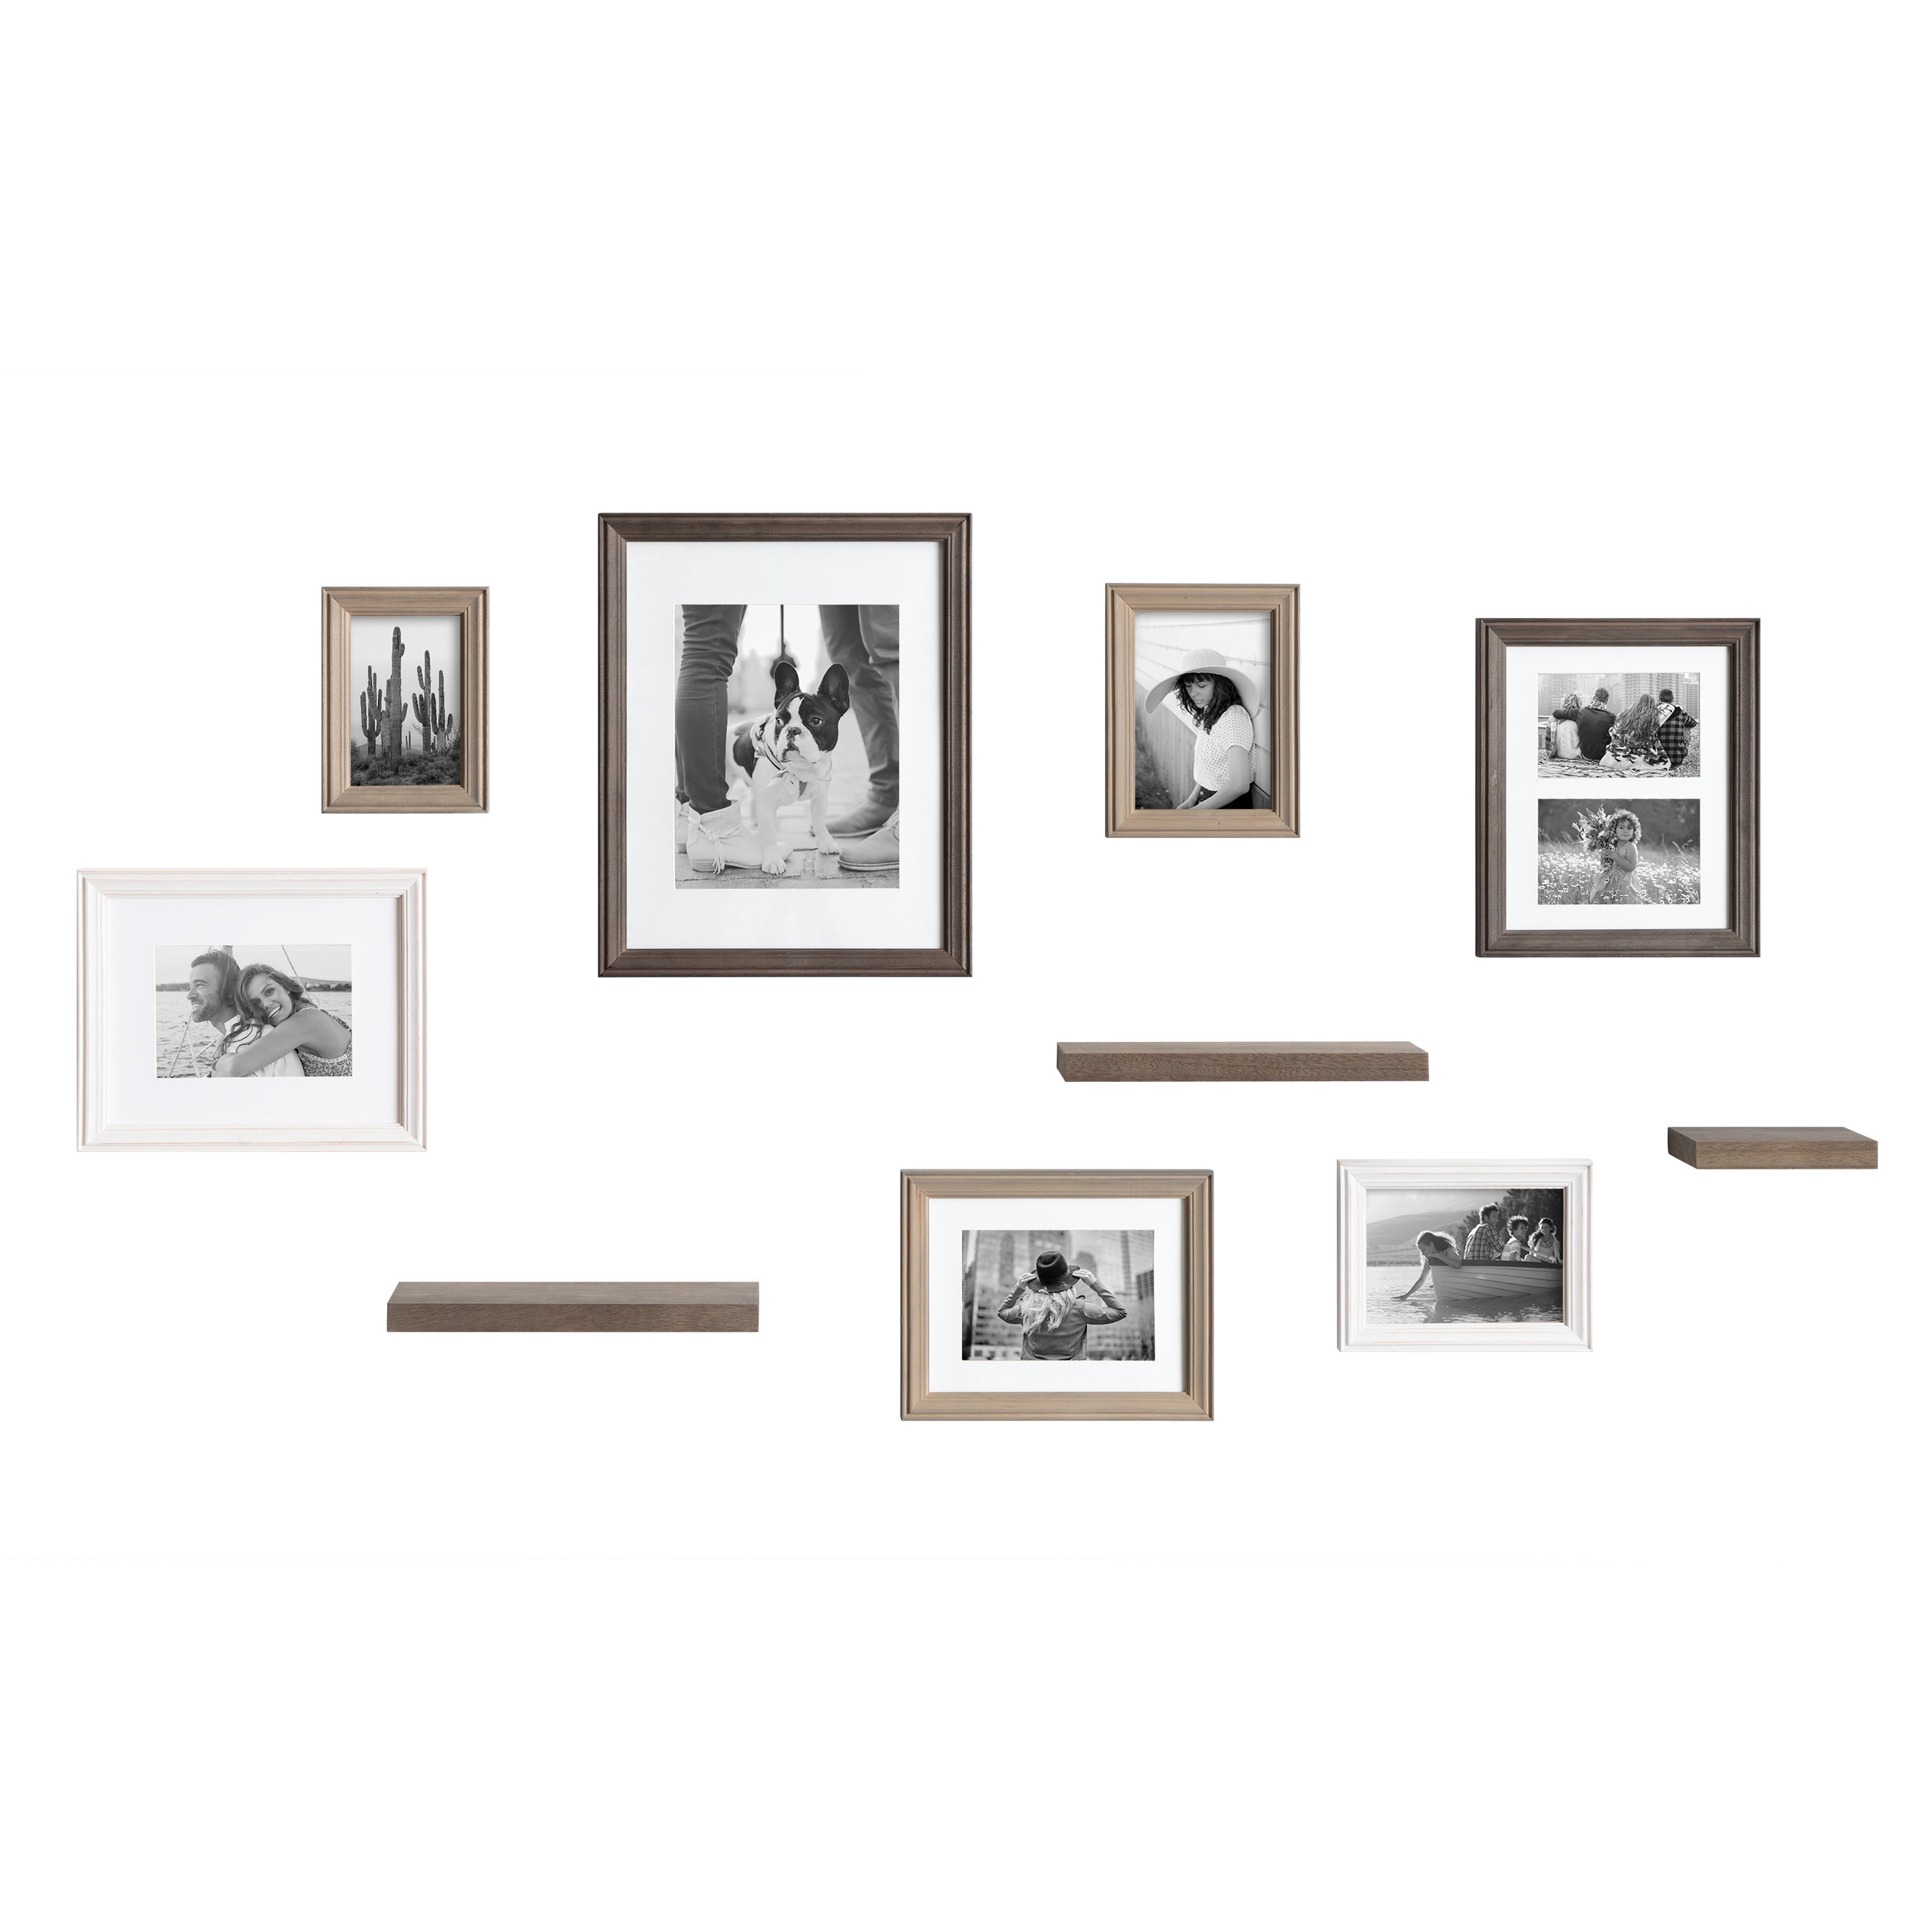 Picture Frames 4x6, Grey Wooden Photo Frames with Clip, Simple Farmhouse Wood Frames for Wall Gallery Mounting or Desktop Display, Memo Board, Small